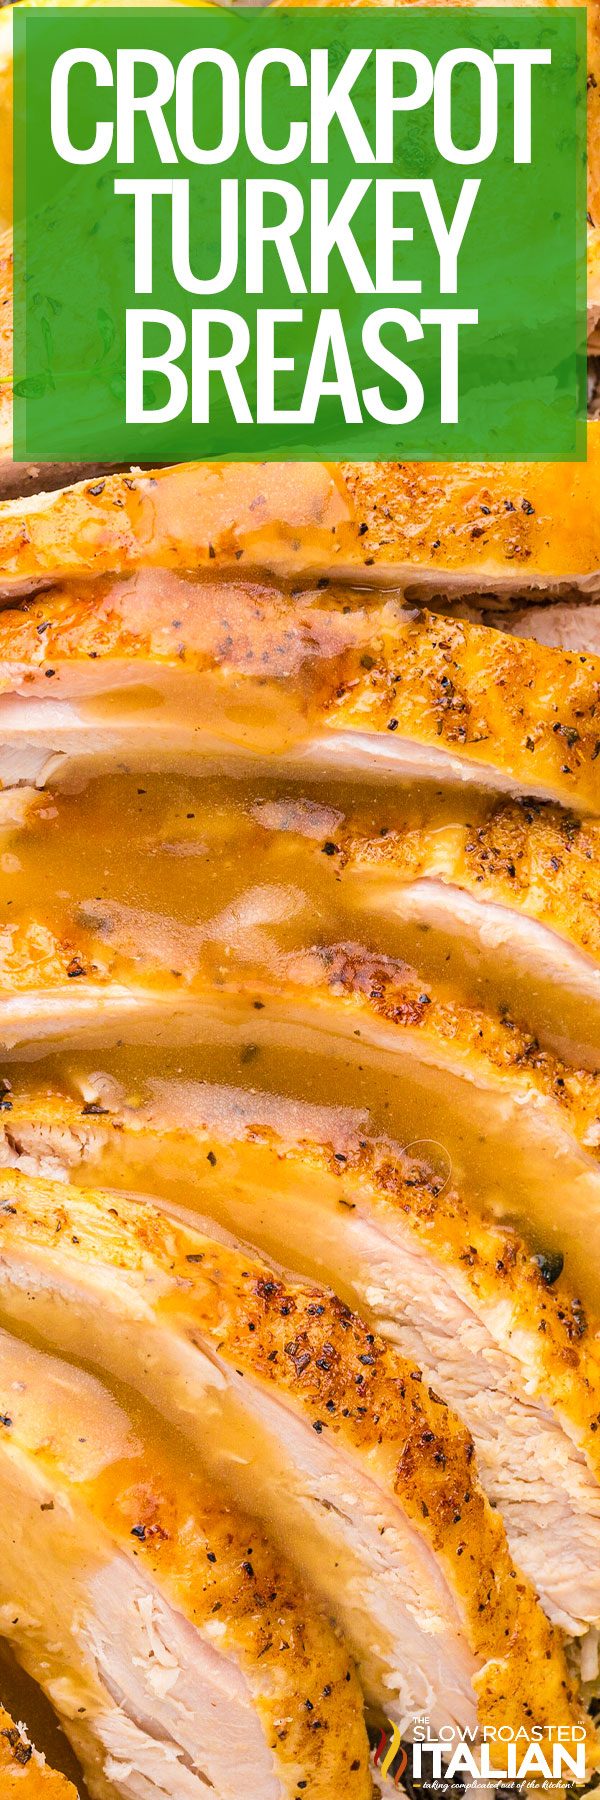 titled image (and shown): crockpot turkey breast